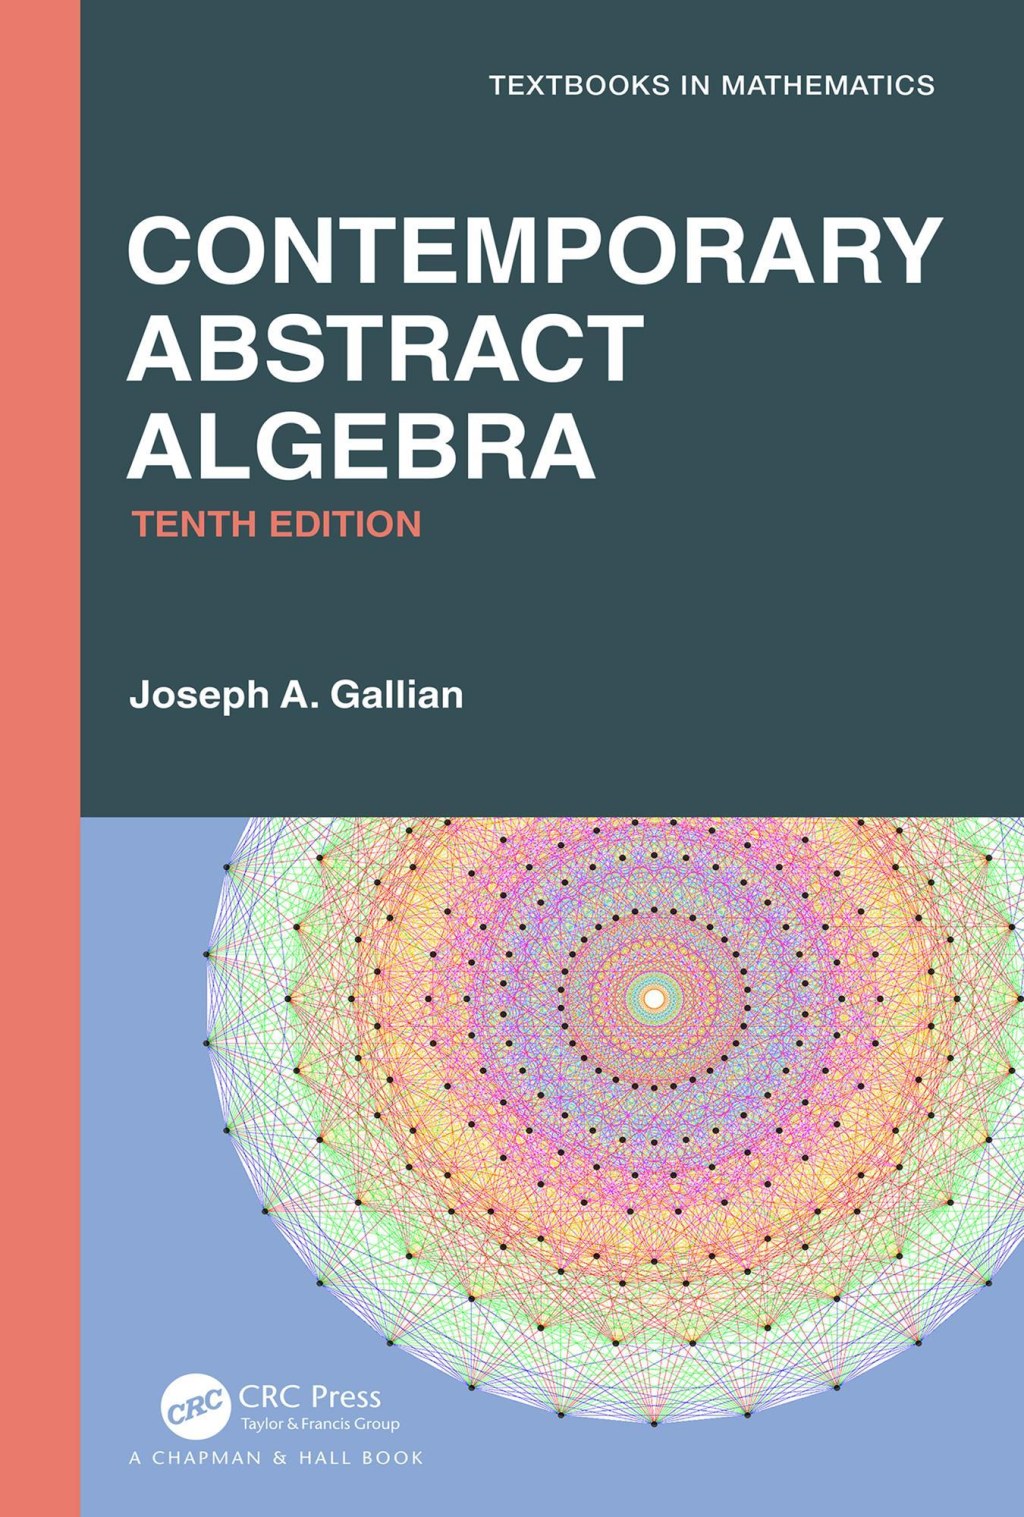 Picture of: Contemporary Abstract Algebra